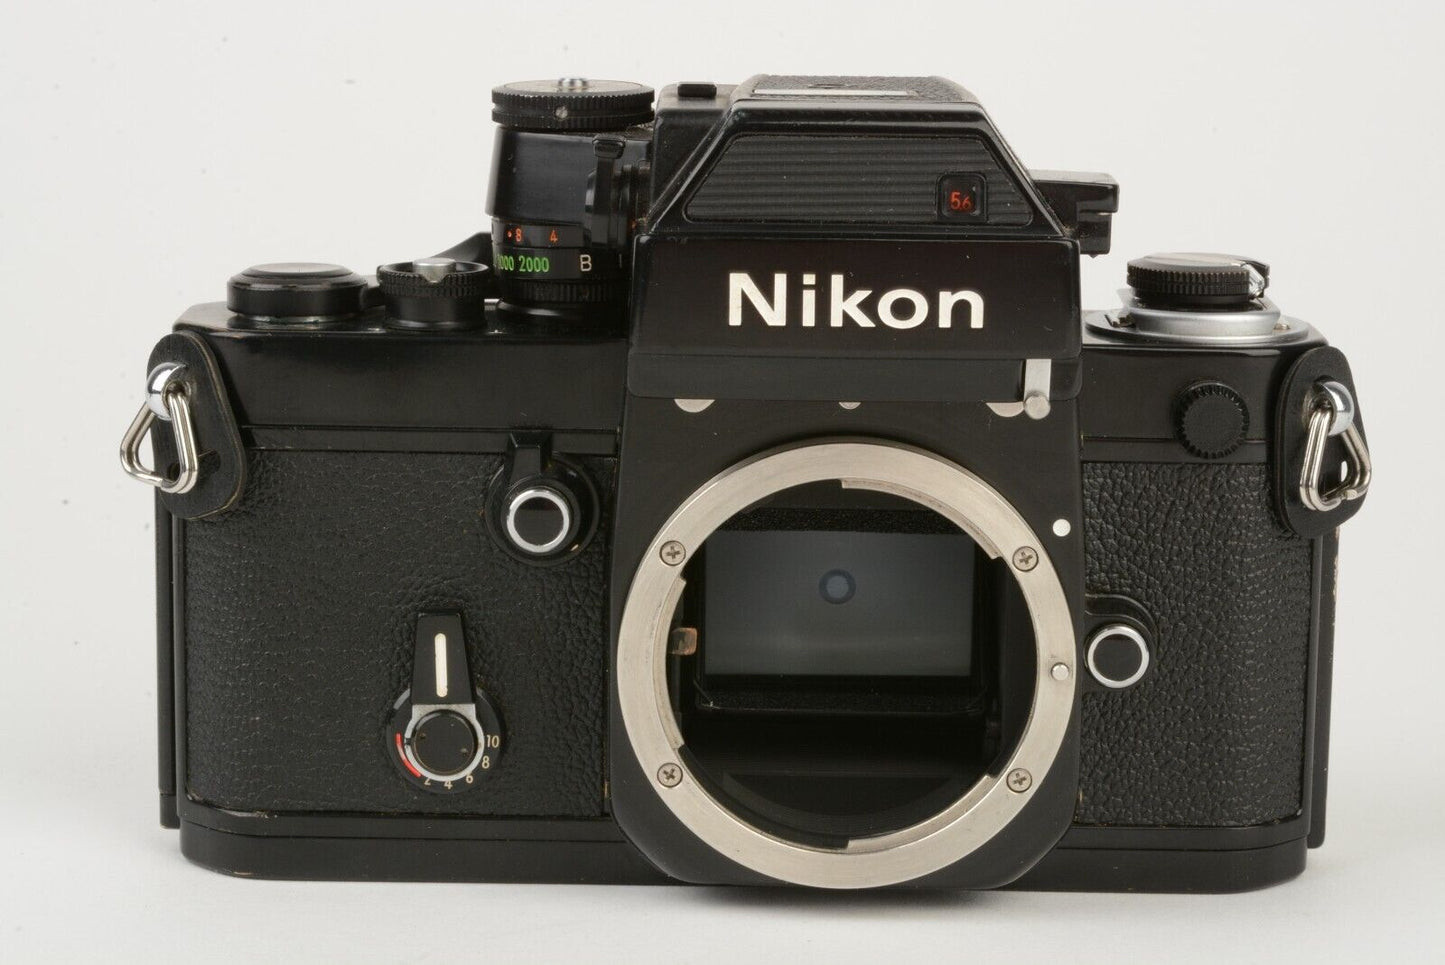 EXC++ NIKON F2SB BLACK PHOTOMIC 35mm BODY w/DP-3 METER, NEW SEALS, TESTED, GREAT